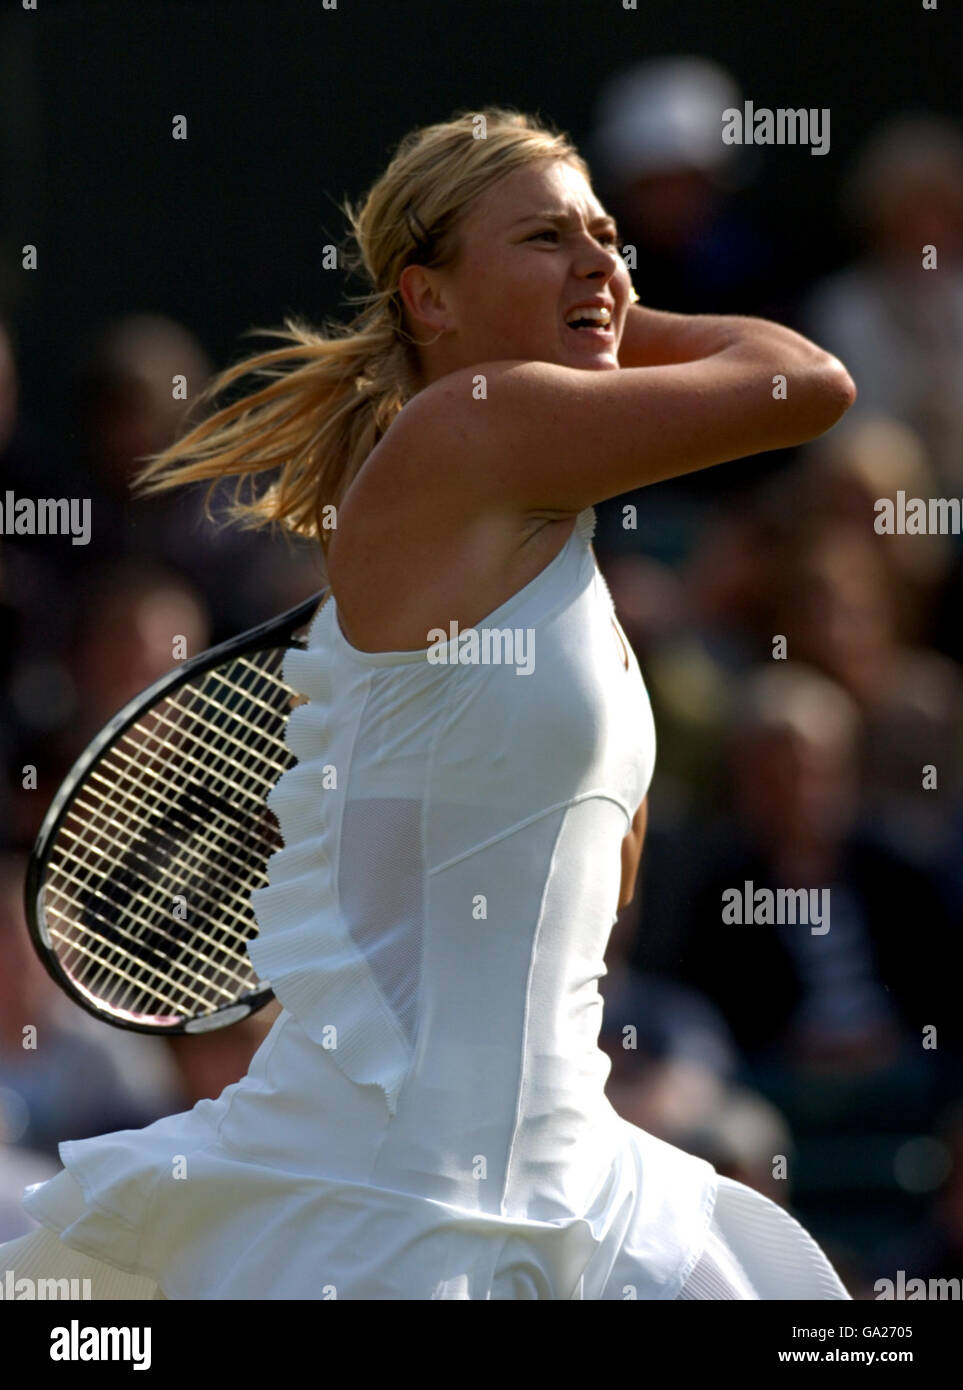 Tennis - Wimbledon Championships 2007 - Day Four - All England Club. Maria Sharapova in action against Severine Bremond Stock Photo